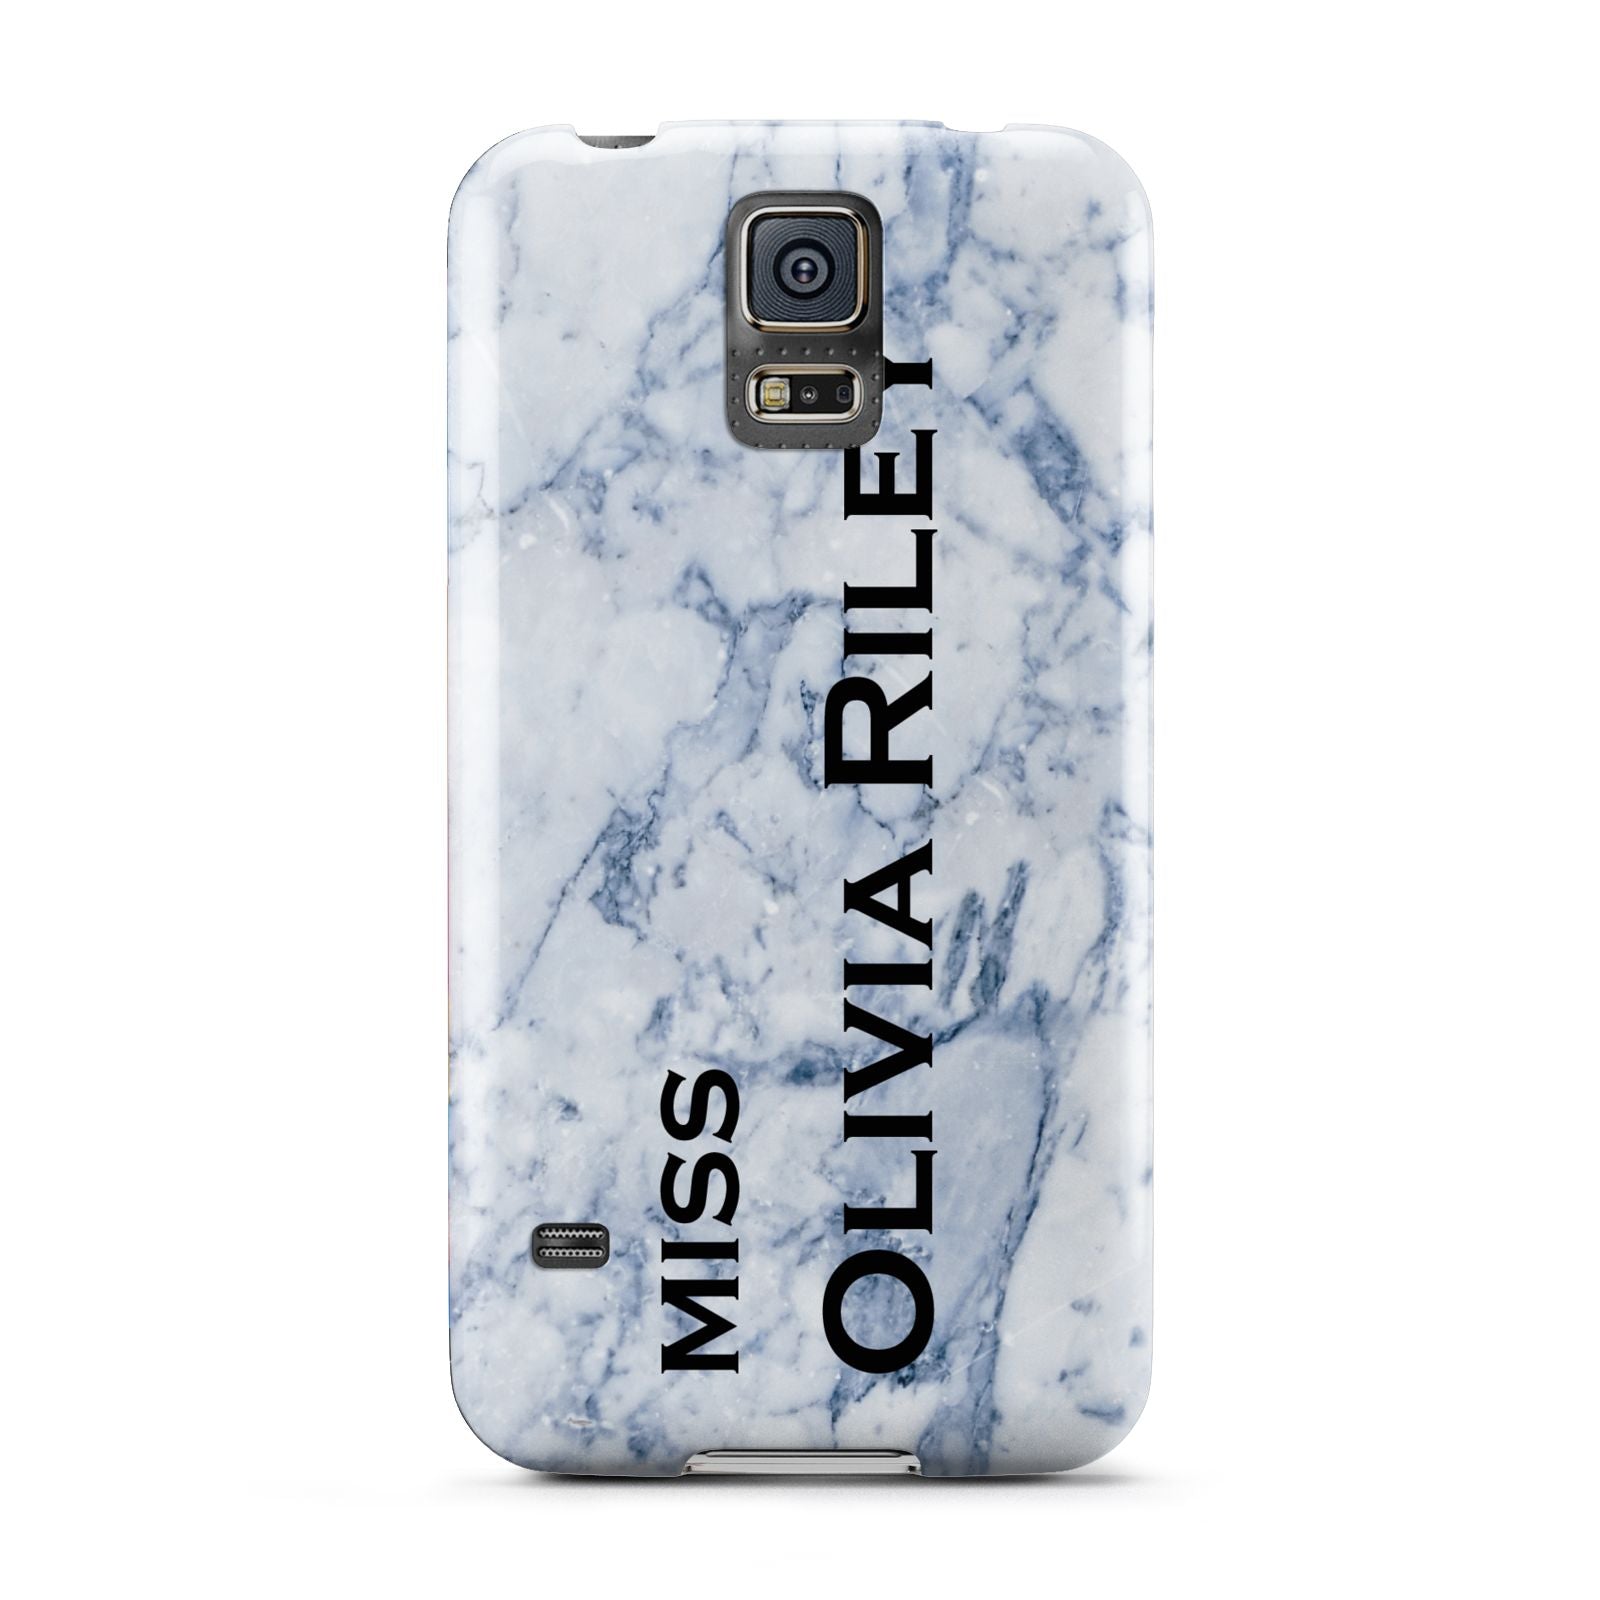 Full Name Grey Marble Samsung Galaxy S5 Case